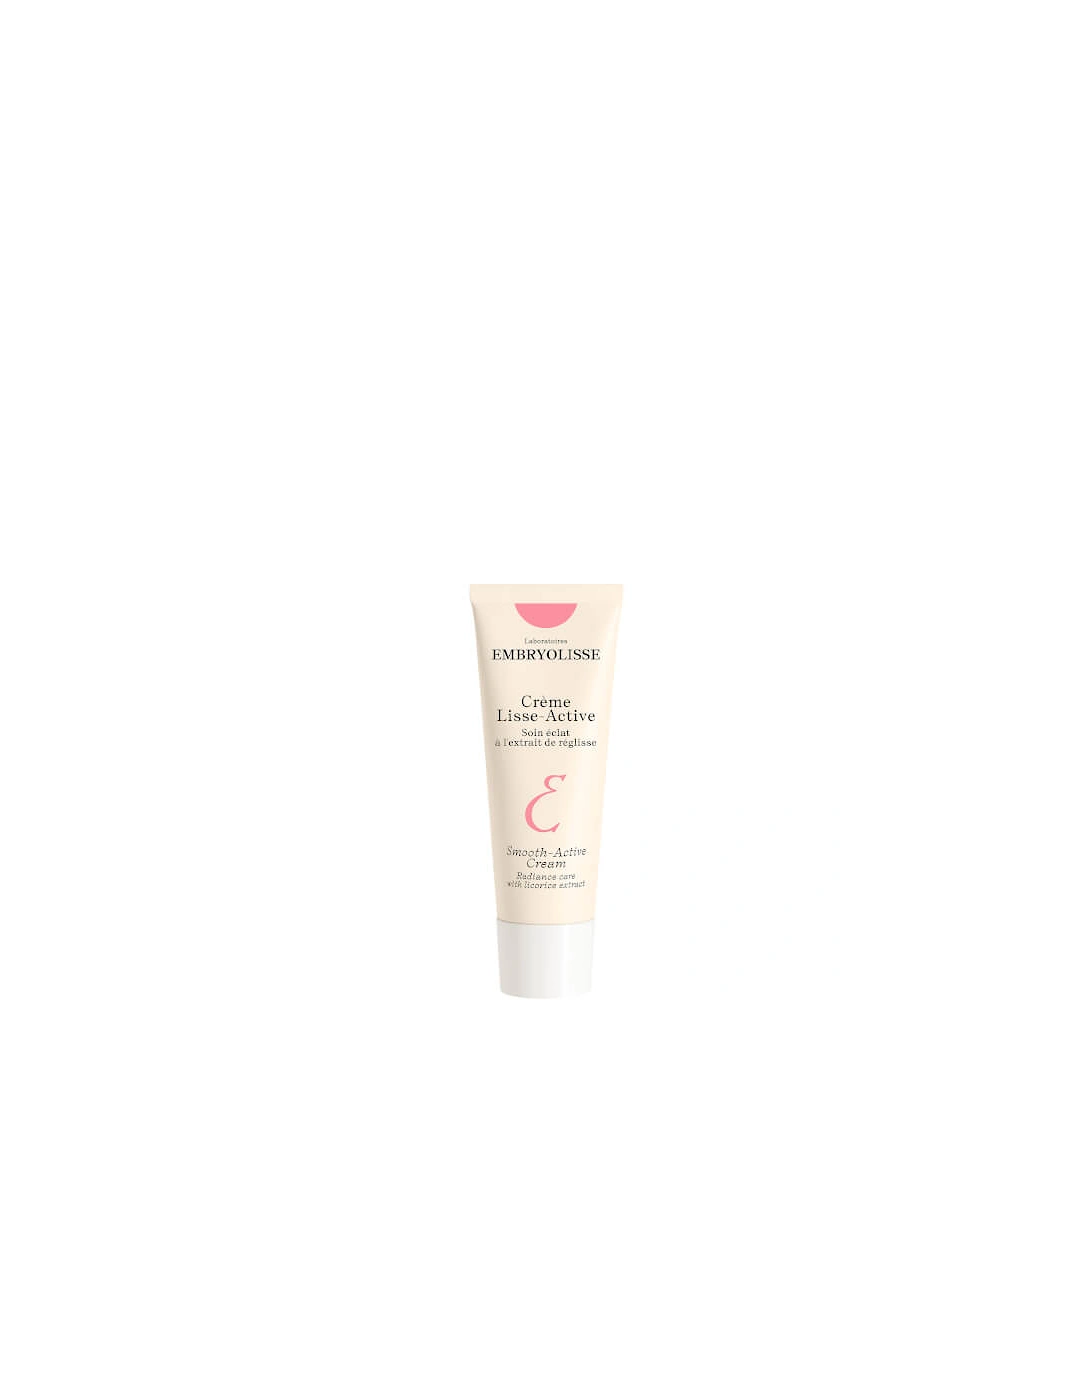 Smooth-Active Cream 40ml, 2 of 1